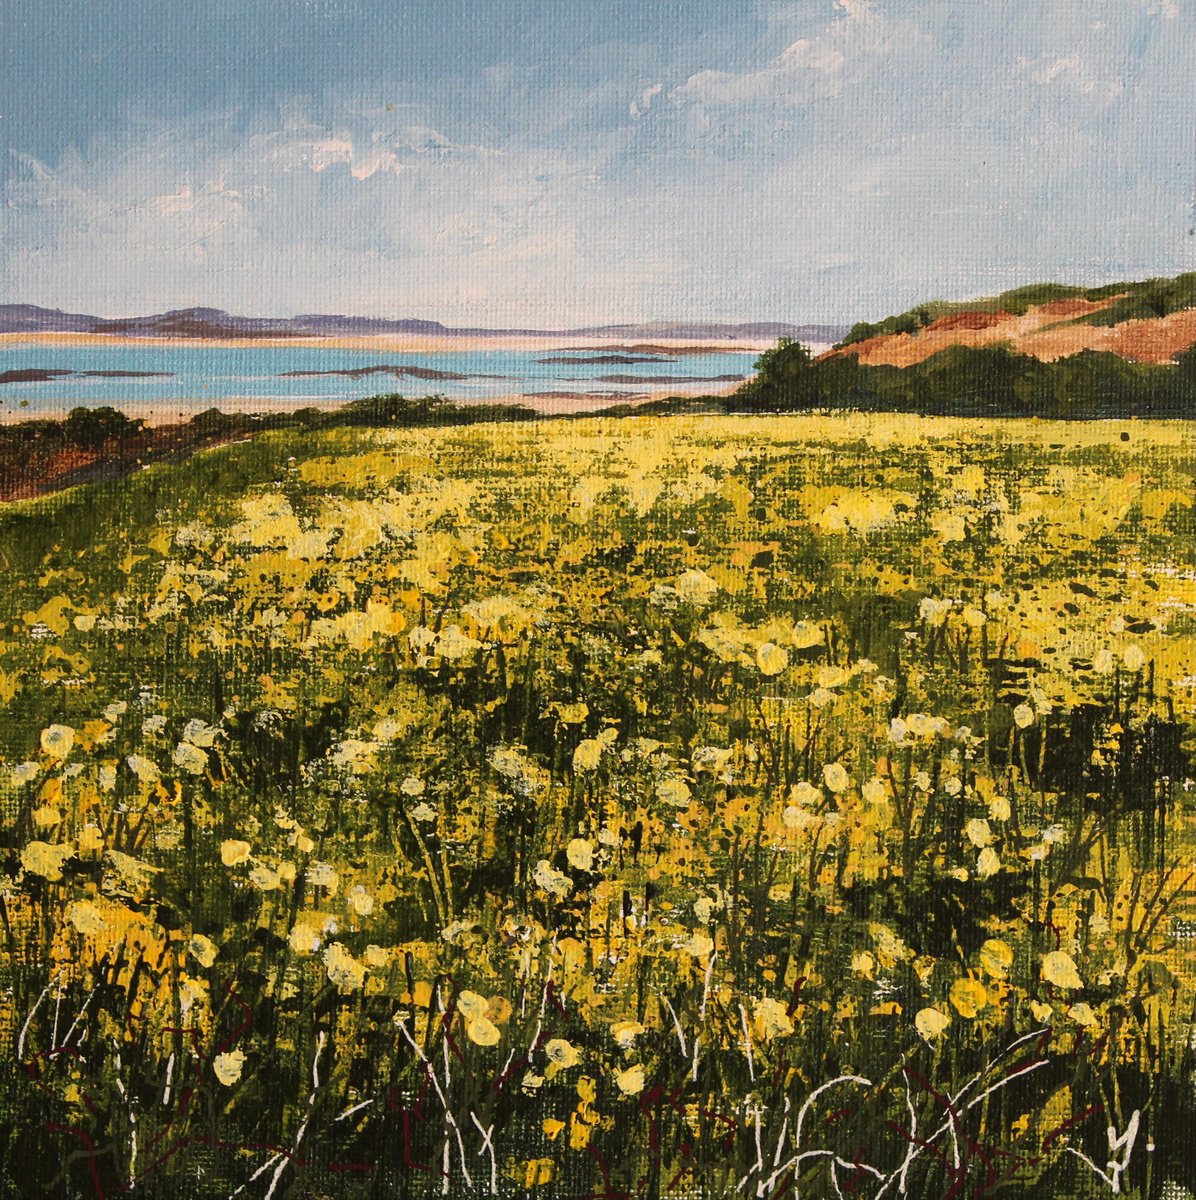 Daffodils on the Isles of Scilly by Valerie Jobes